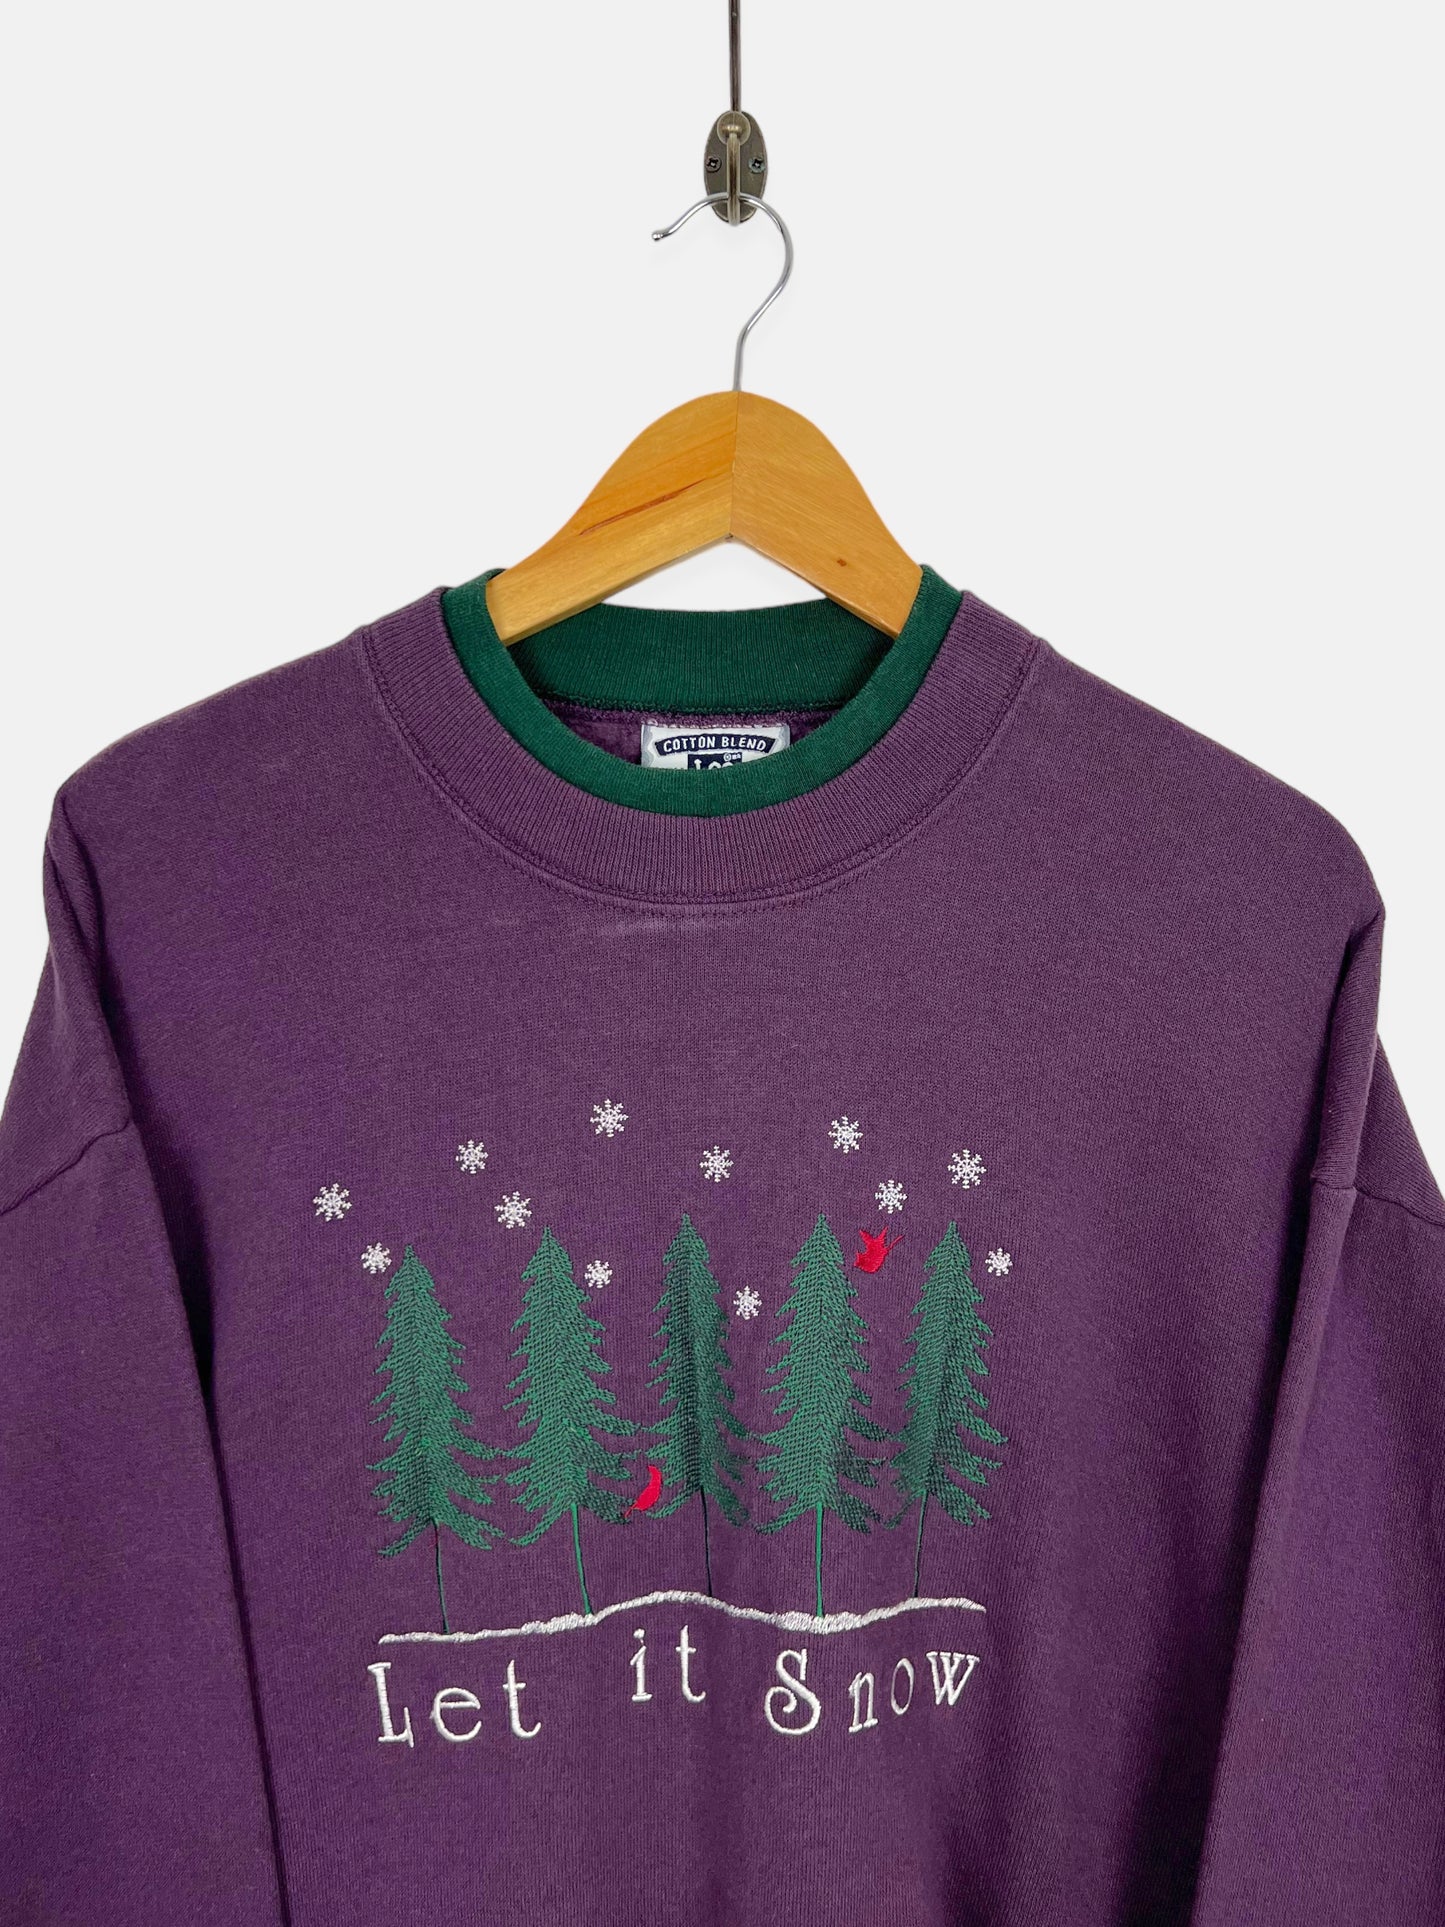 90's Let It Snow USA Made Embroidered Vintage High-Neck Sweatshirt Size M